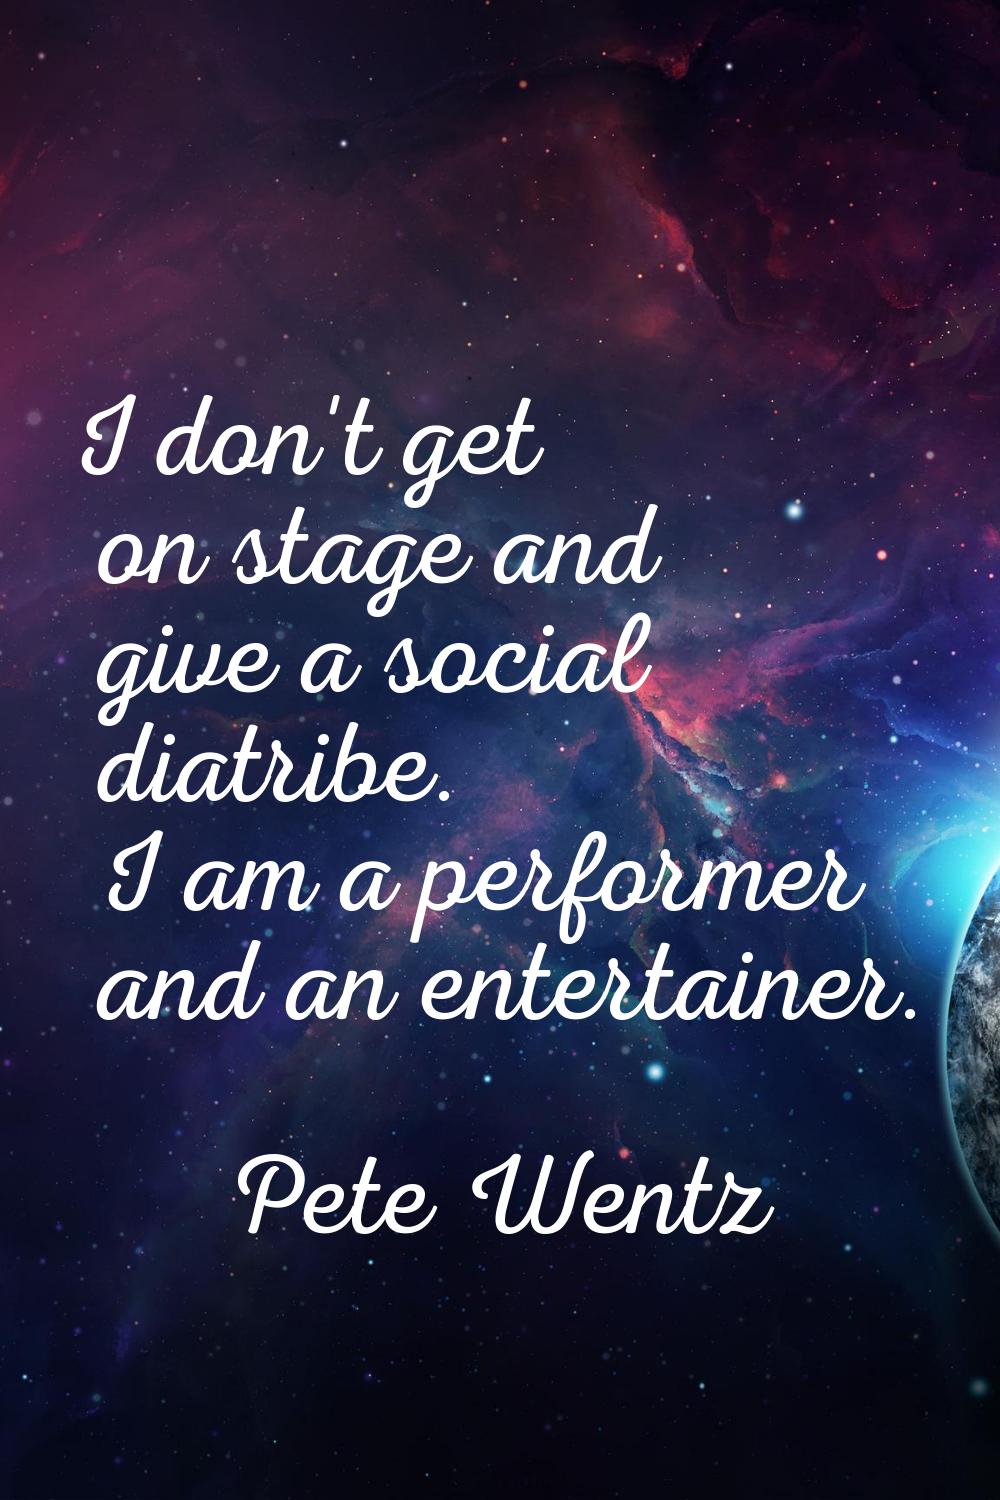 I don't get on stage and give a social diatribe. I am a performer and an entertainer.